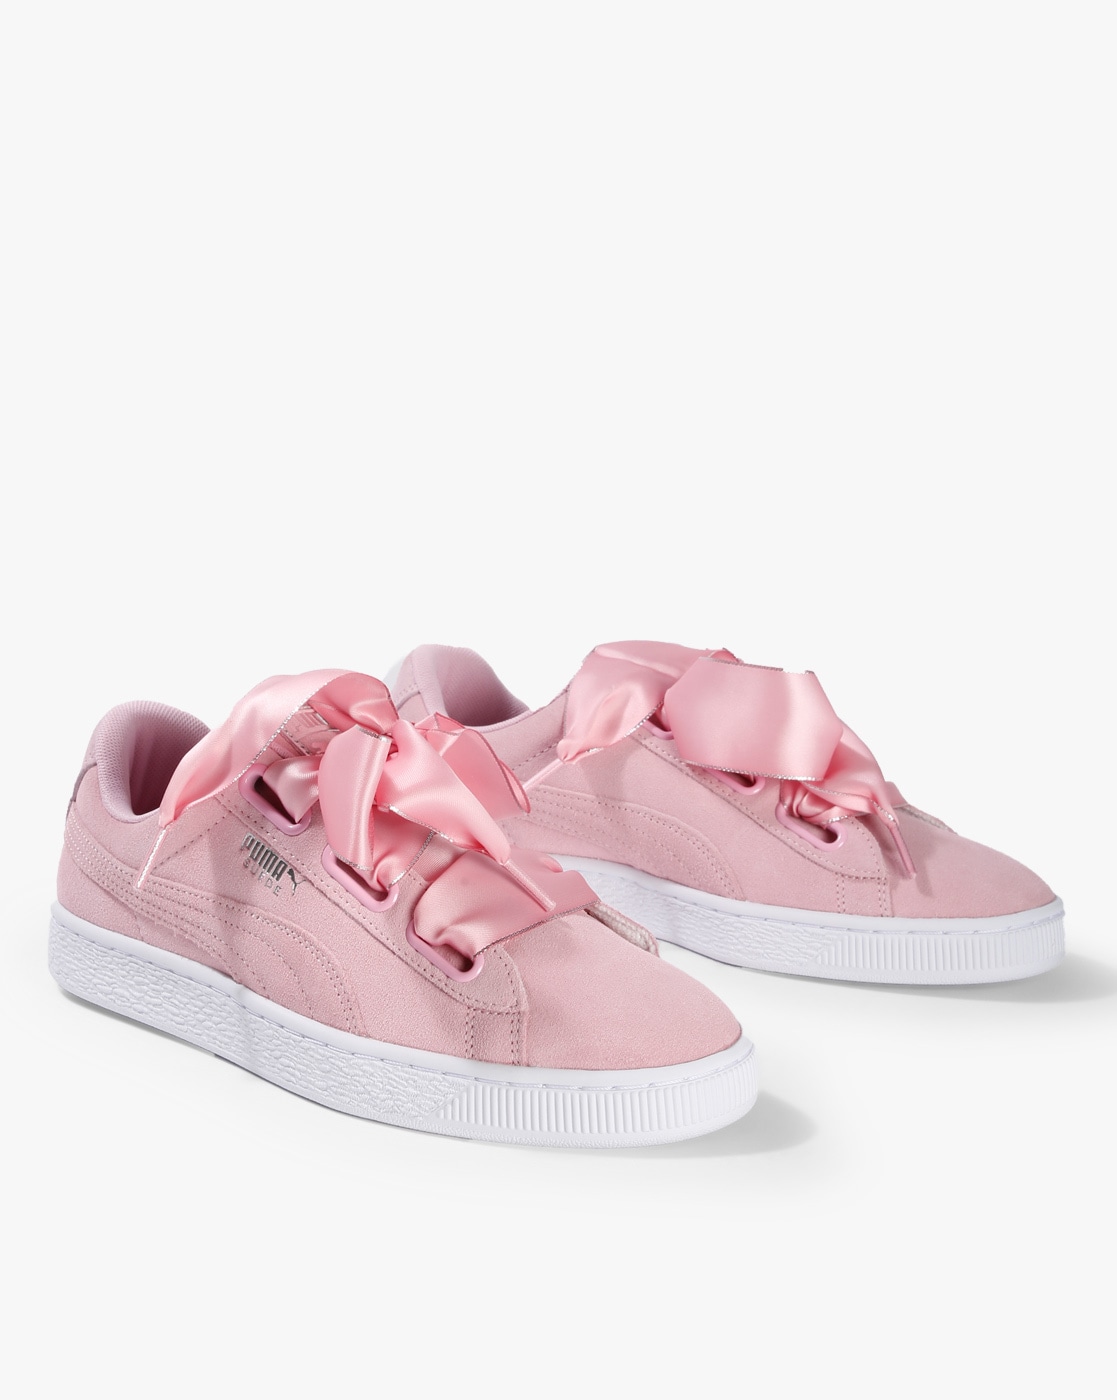 puma grey and pink shoes